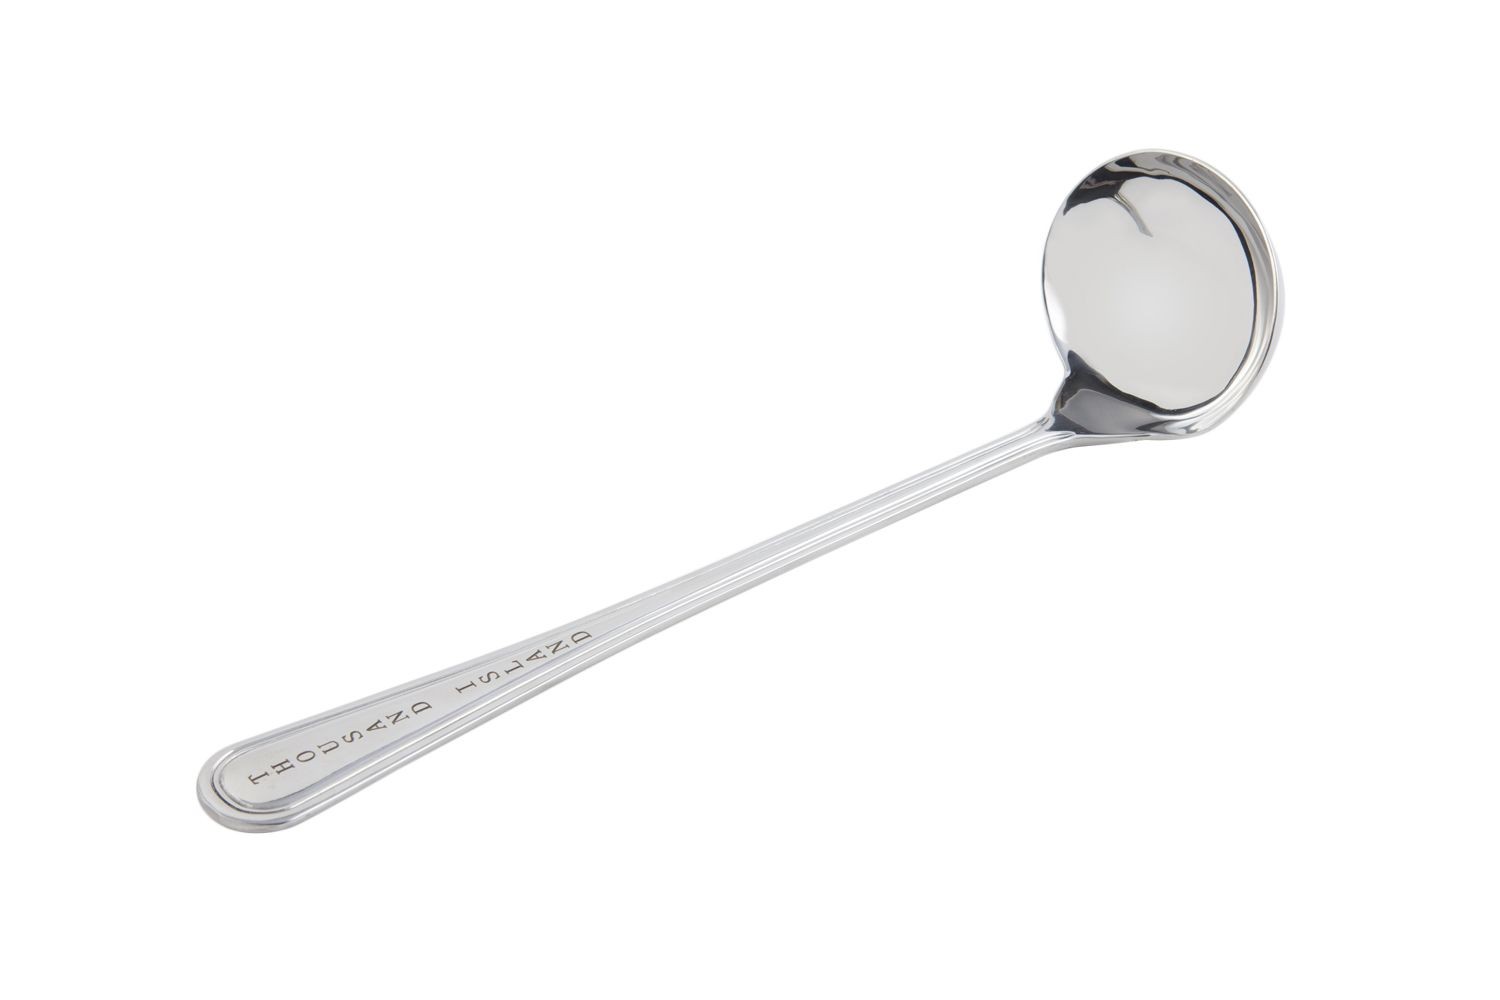 Bon Chef 9407SS Stainless Steel Thousand Island Salad Dressing Ladle, 11 1/2"